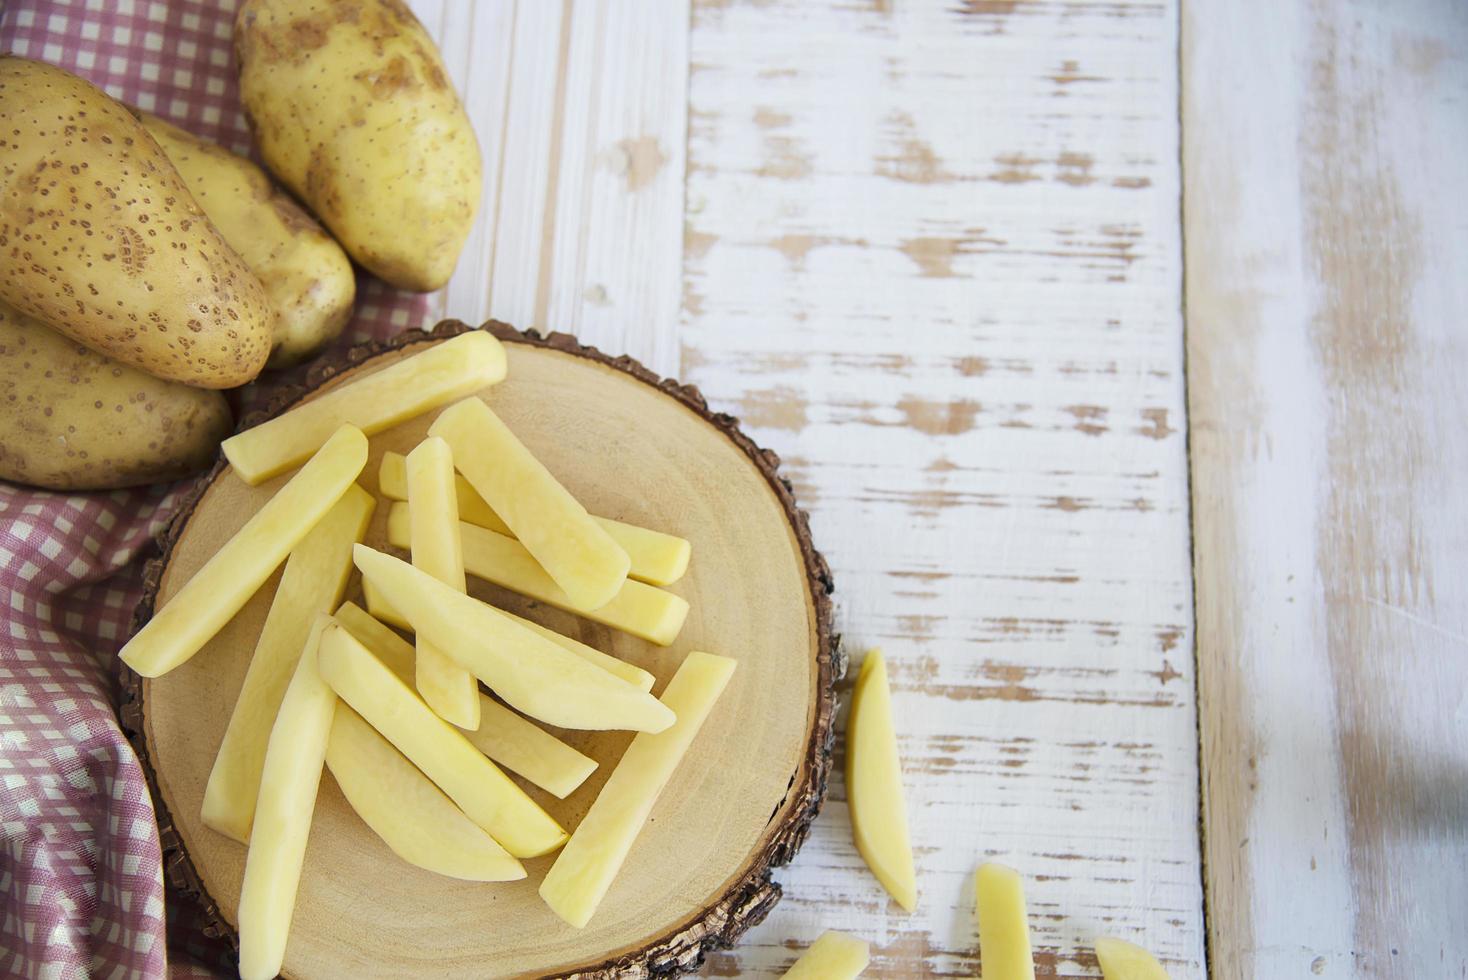 Sliced potato stick ready for making French fries - traditional food preparation concept photo